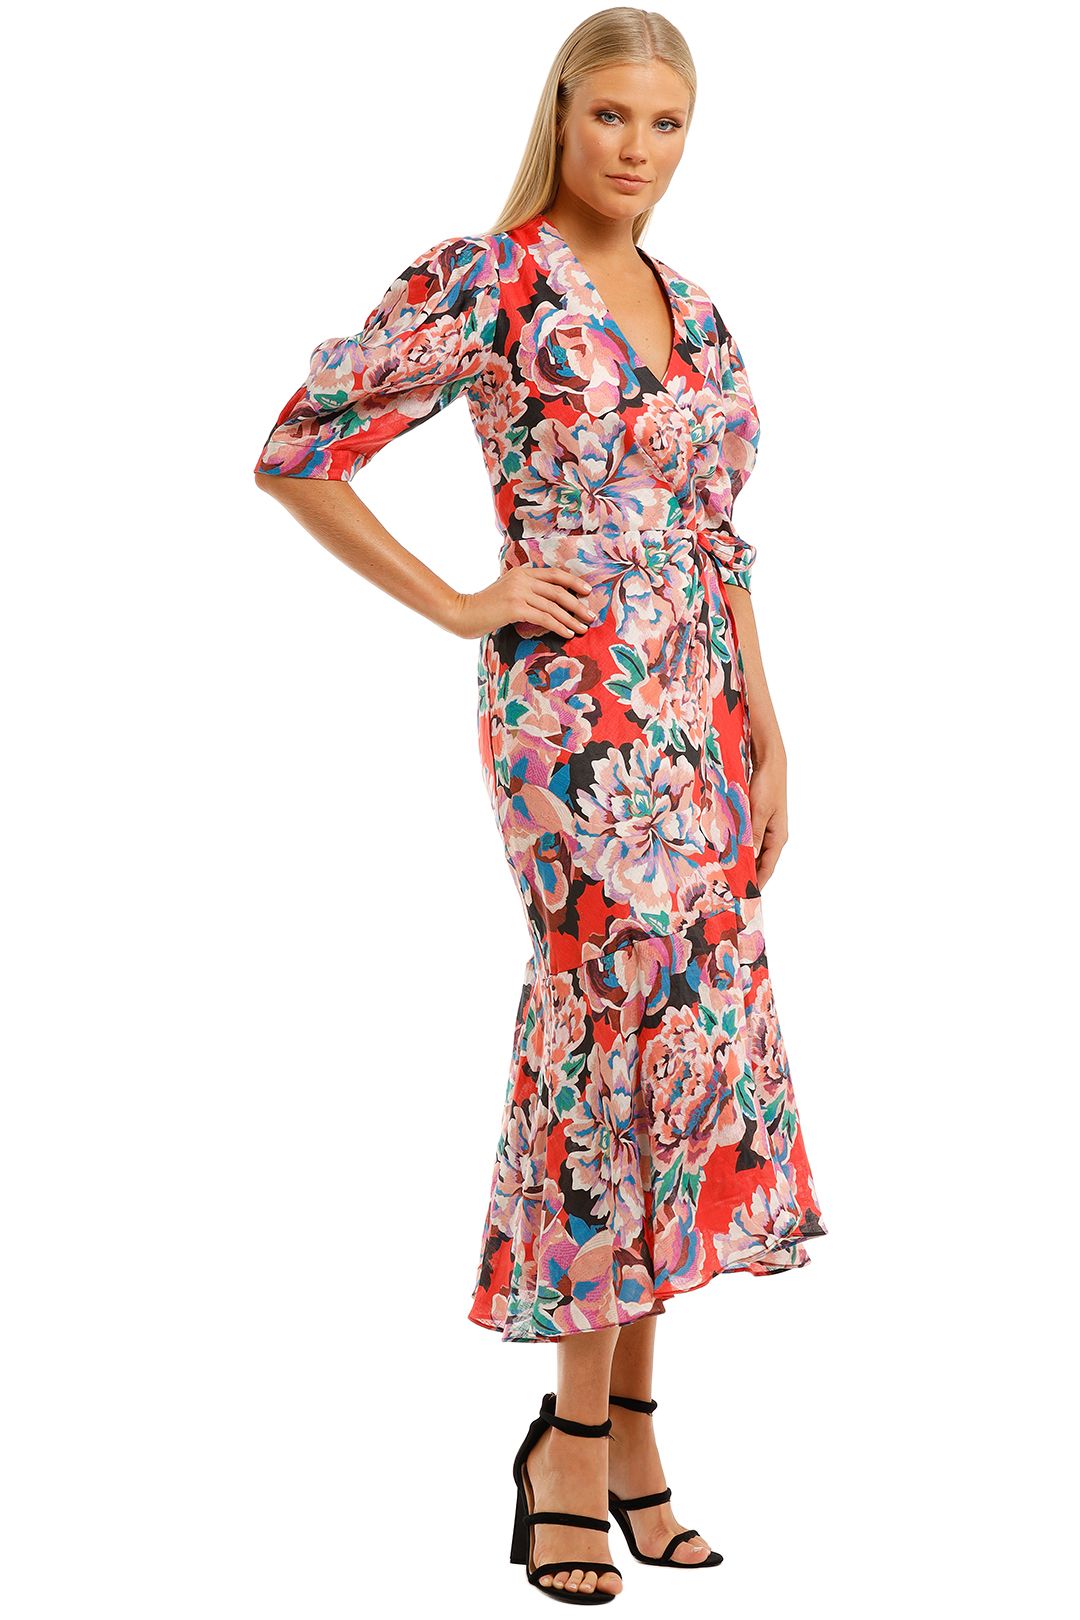 Flourish Wrap Dress by Ginger and Smart for Hire | GlamCorner